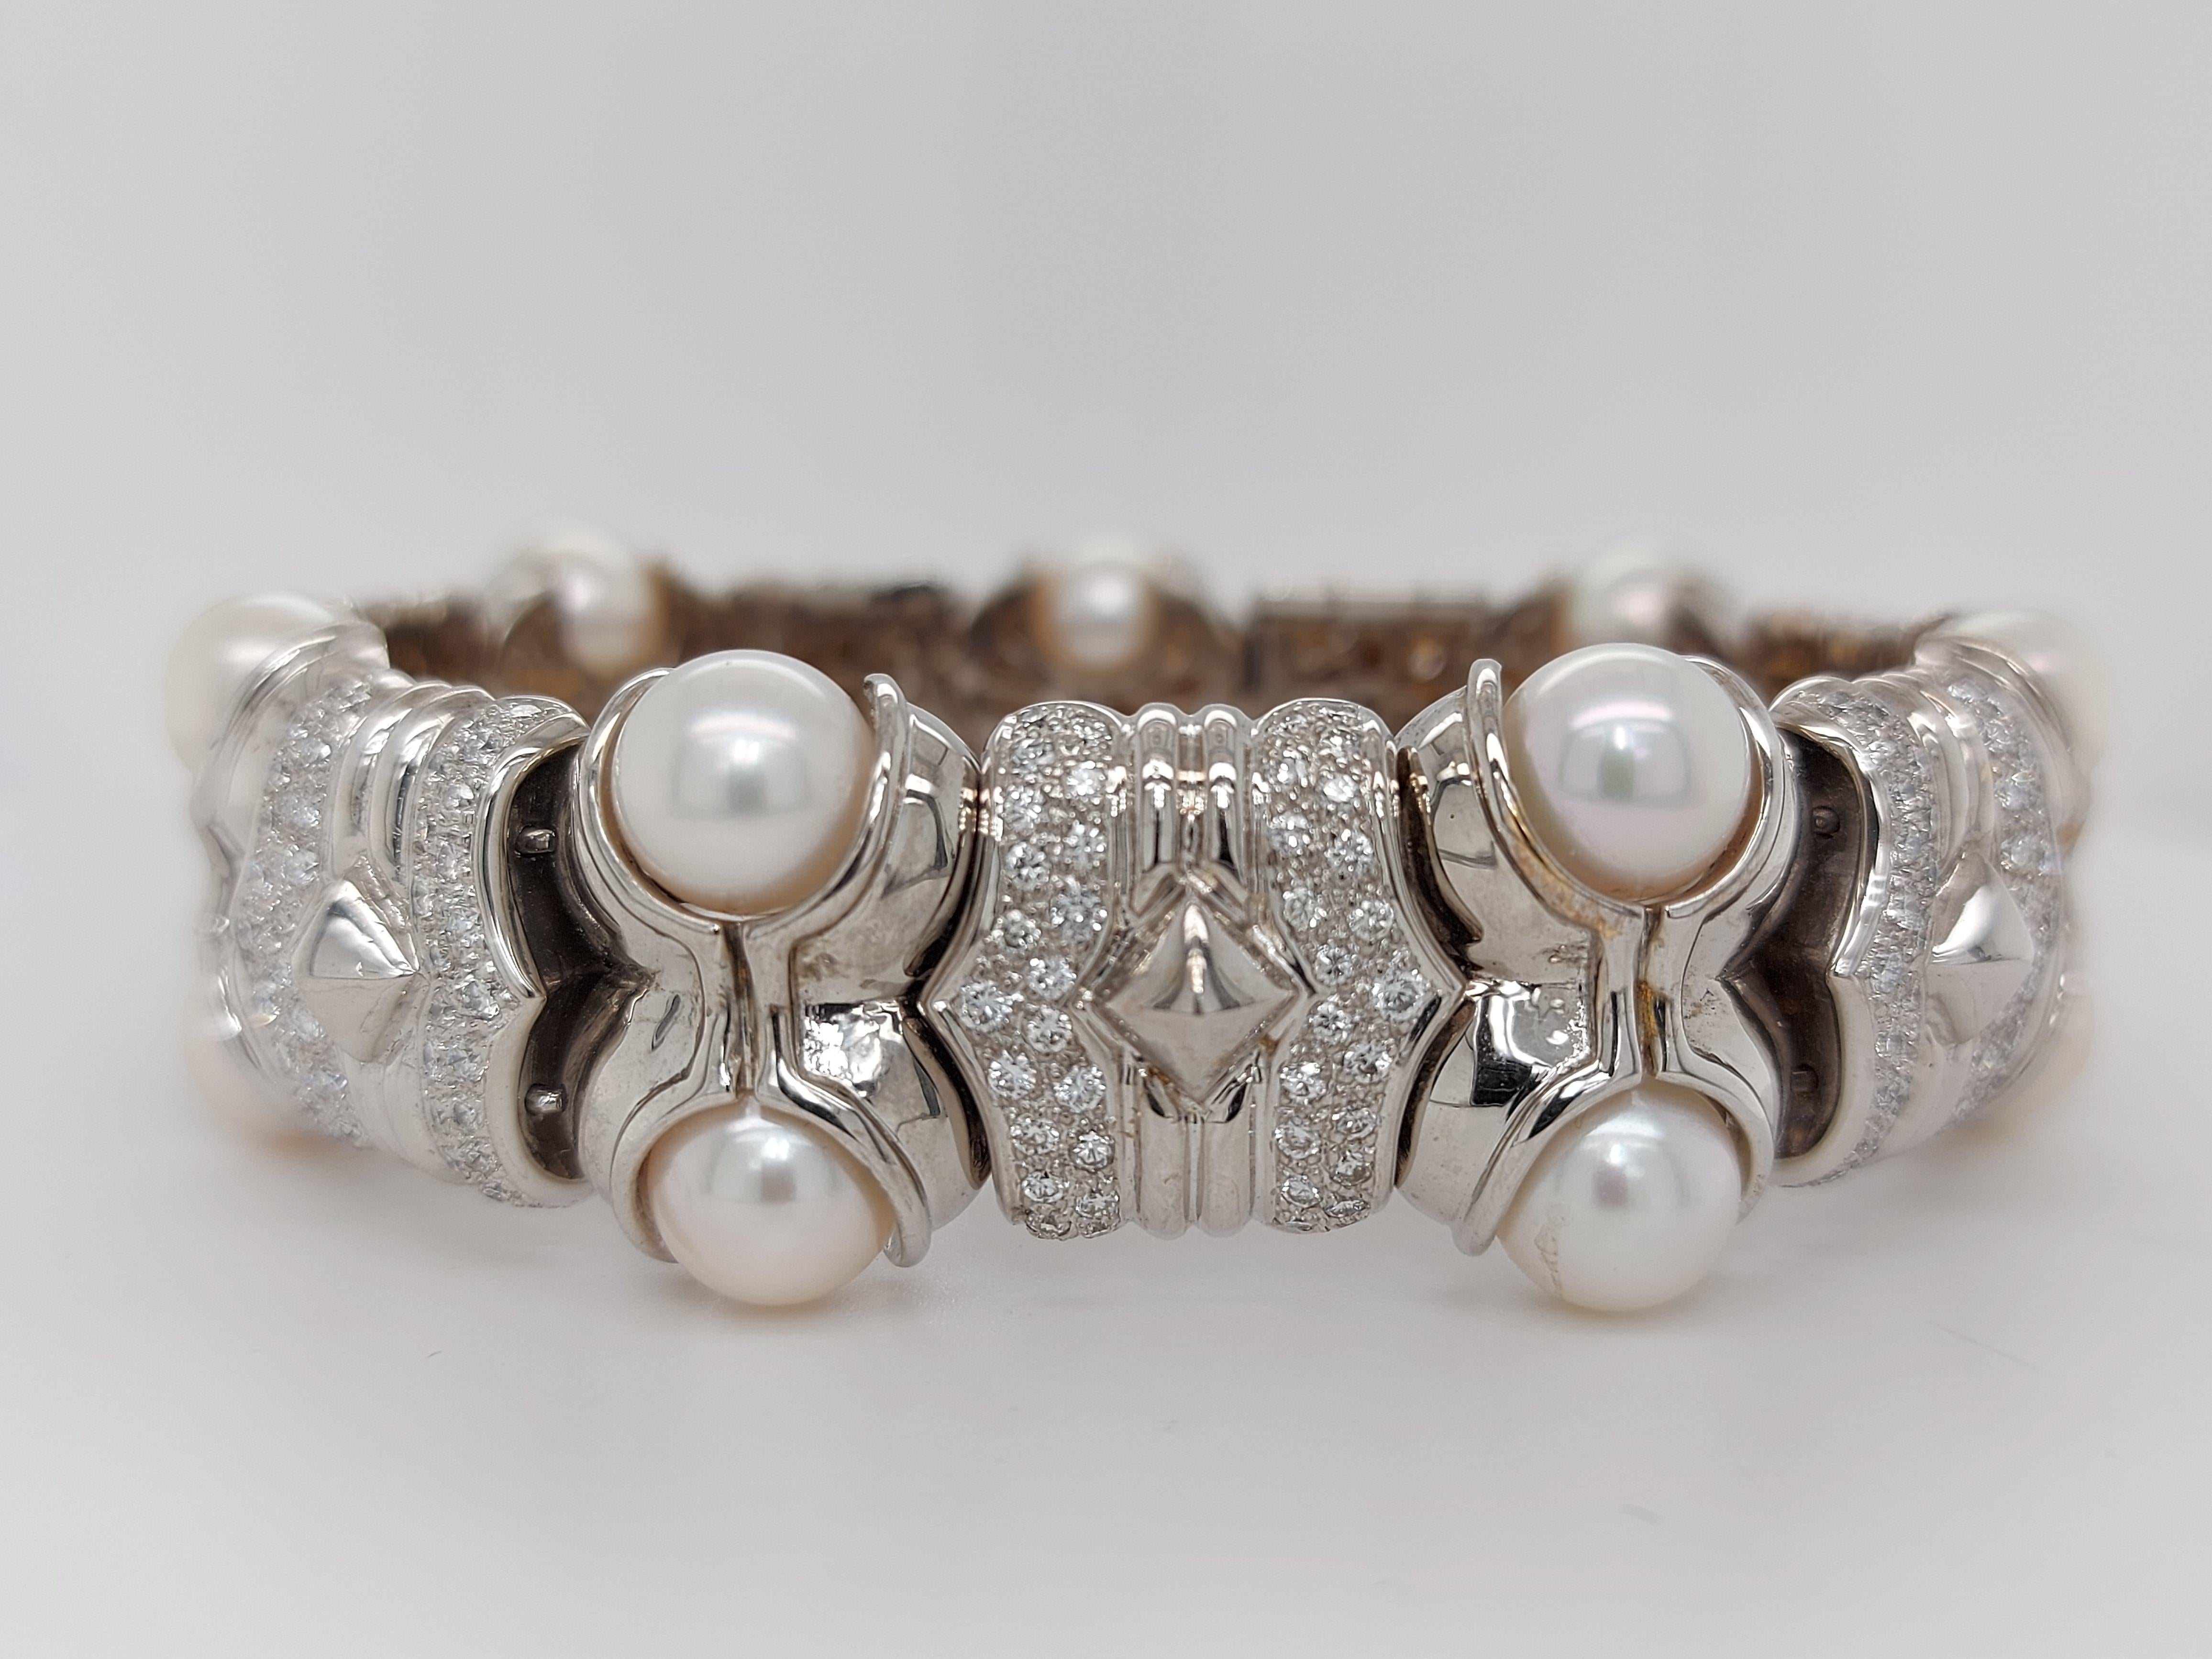 18 Karat White Gold Bracelet with Brilliant Cut Diamonds and Pearls For Sale 2